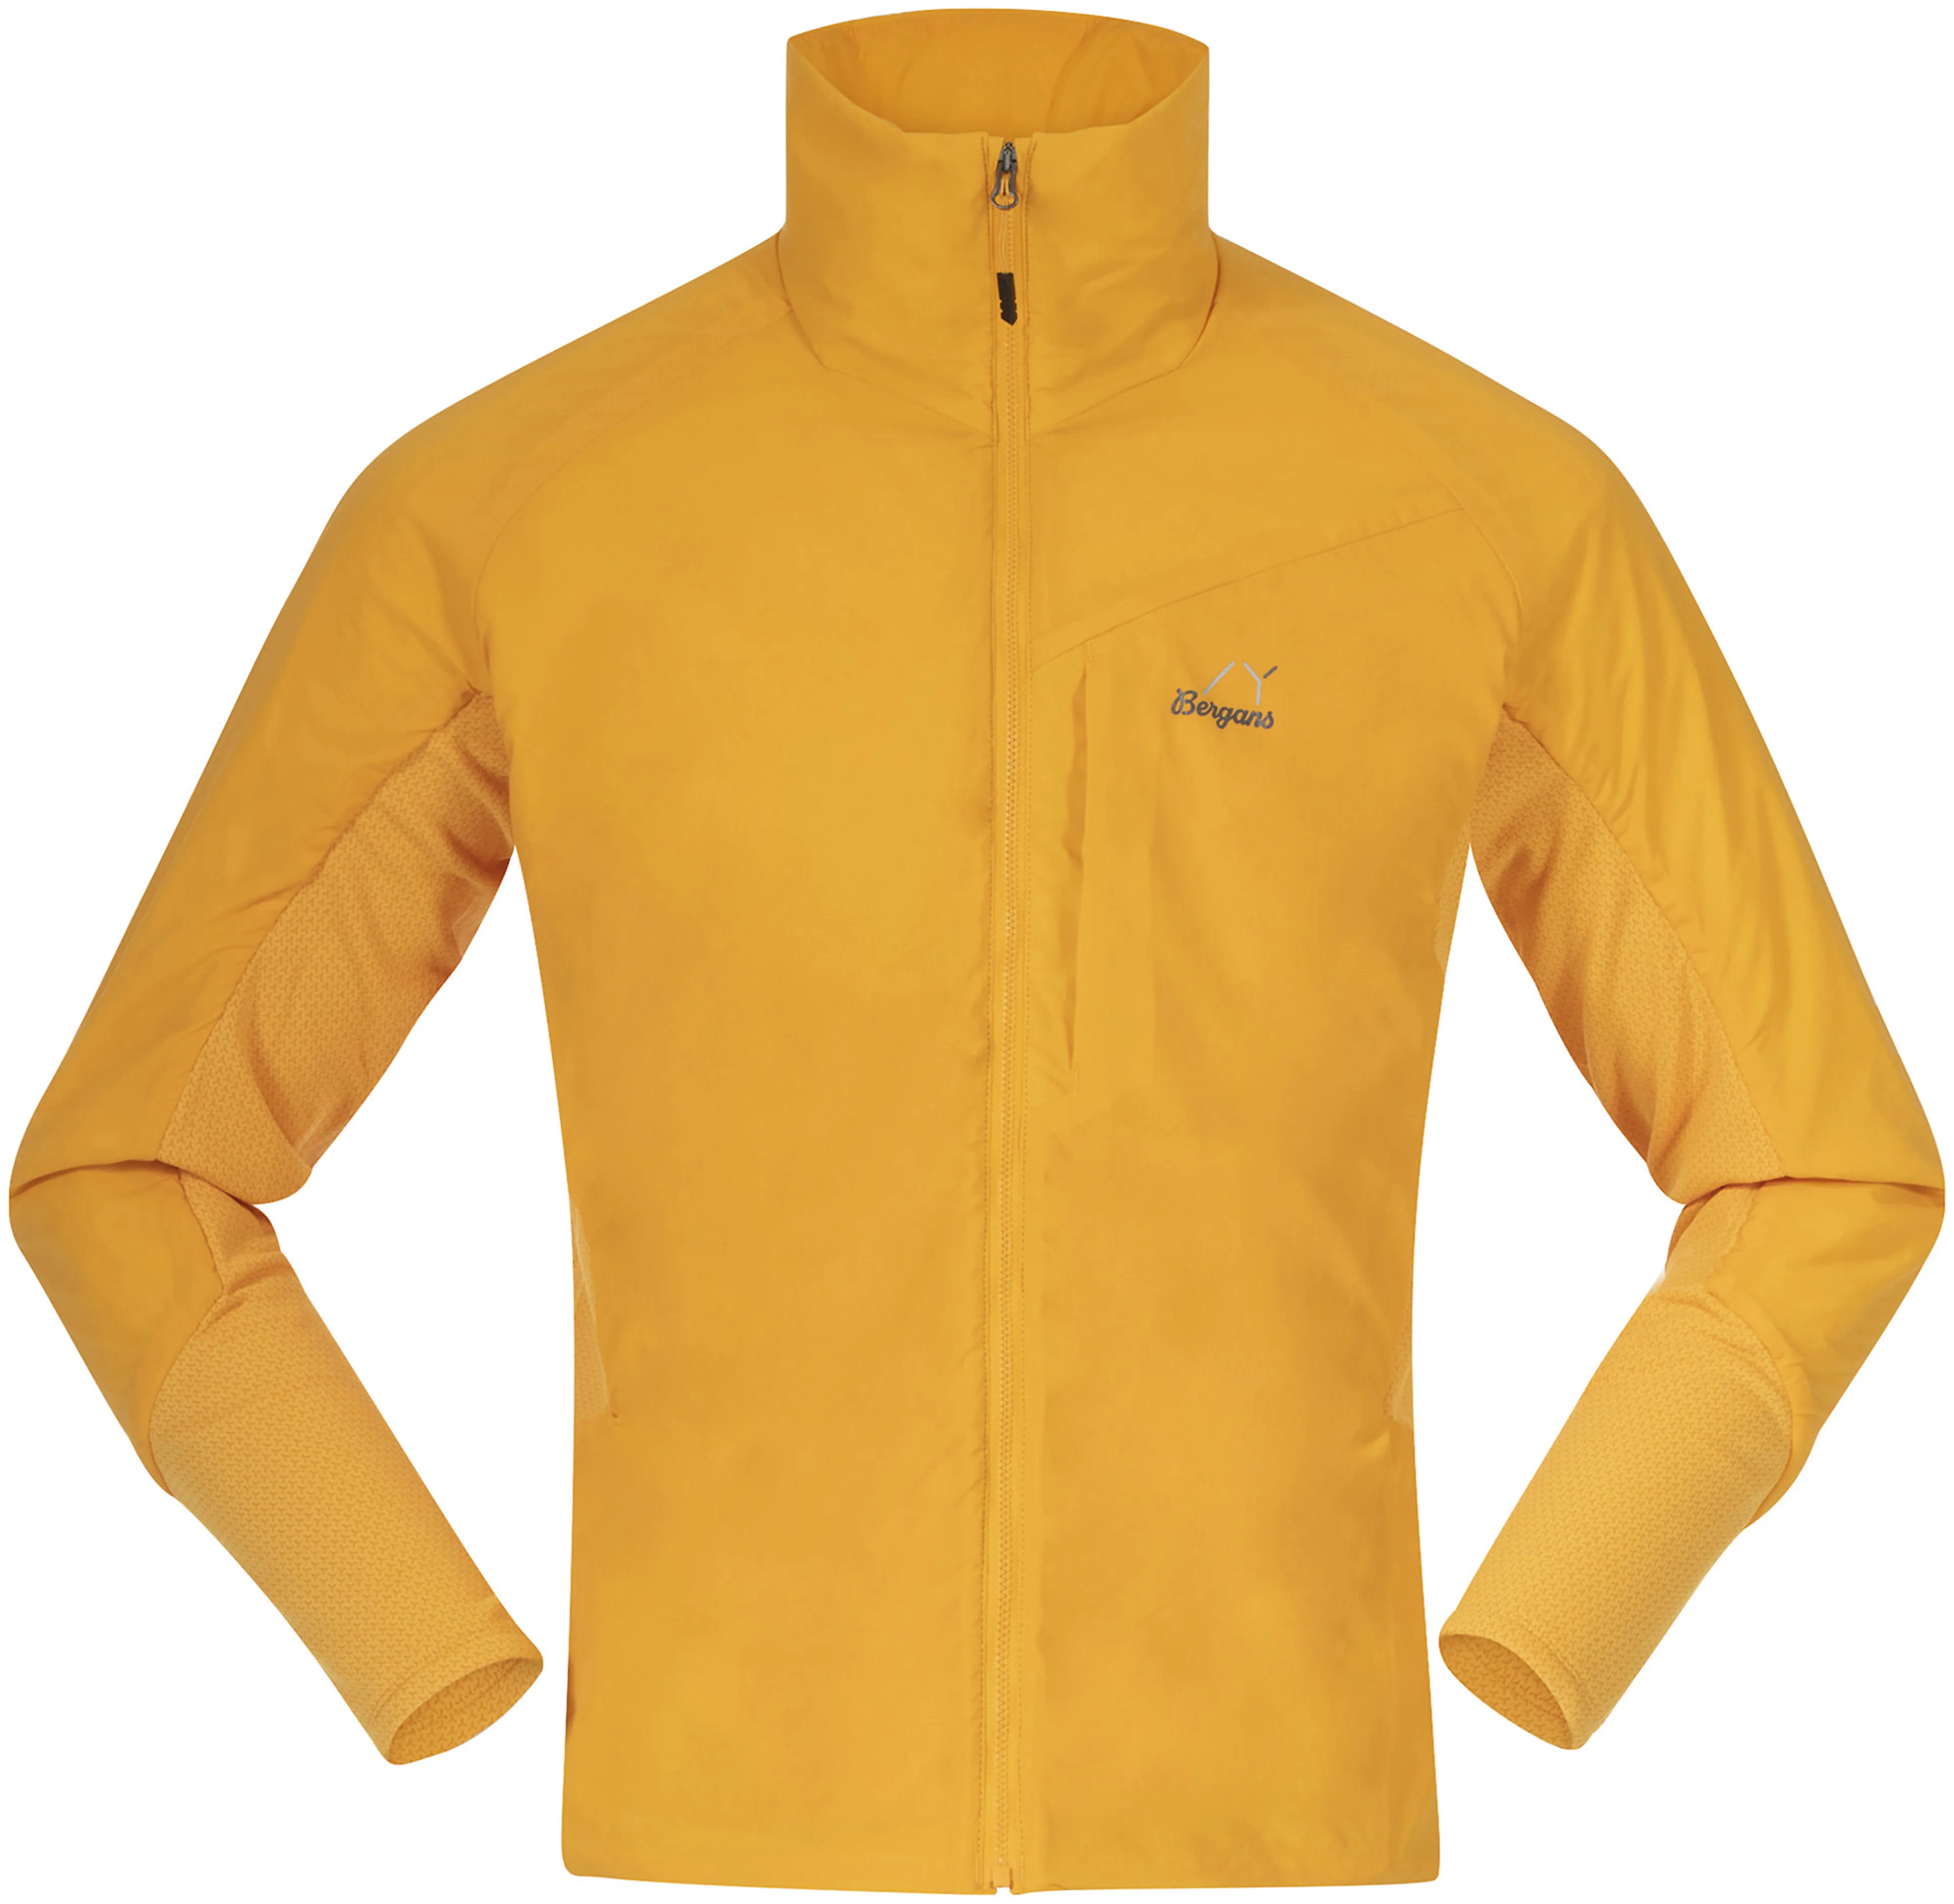 Y MountainLine Light Insulated Air Jacket Men